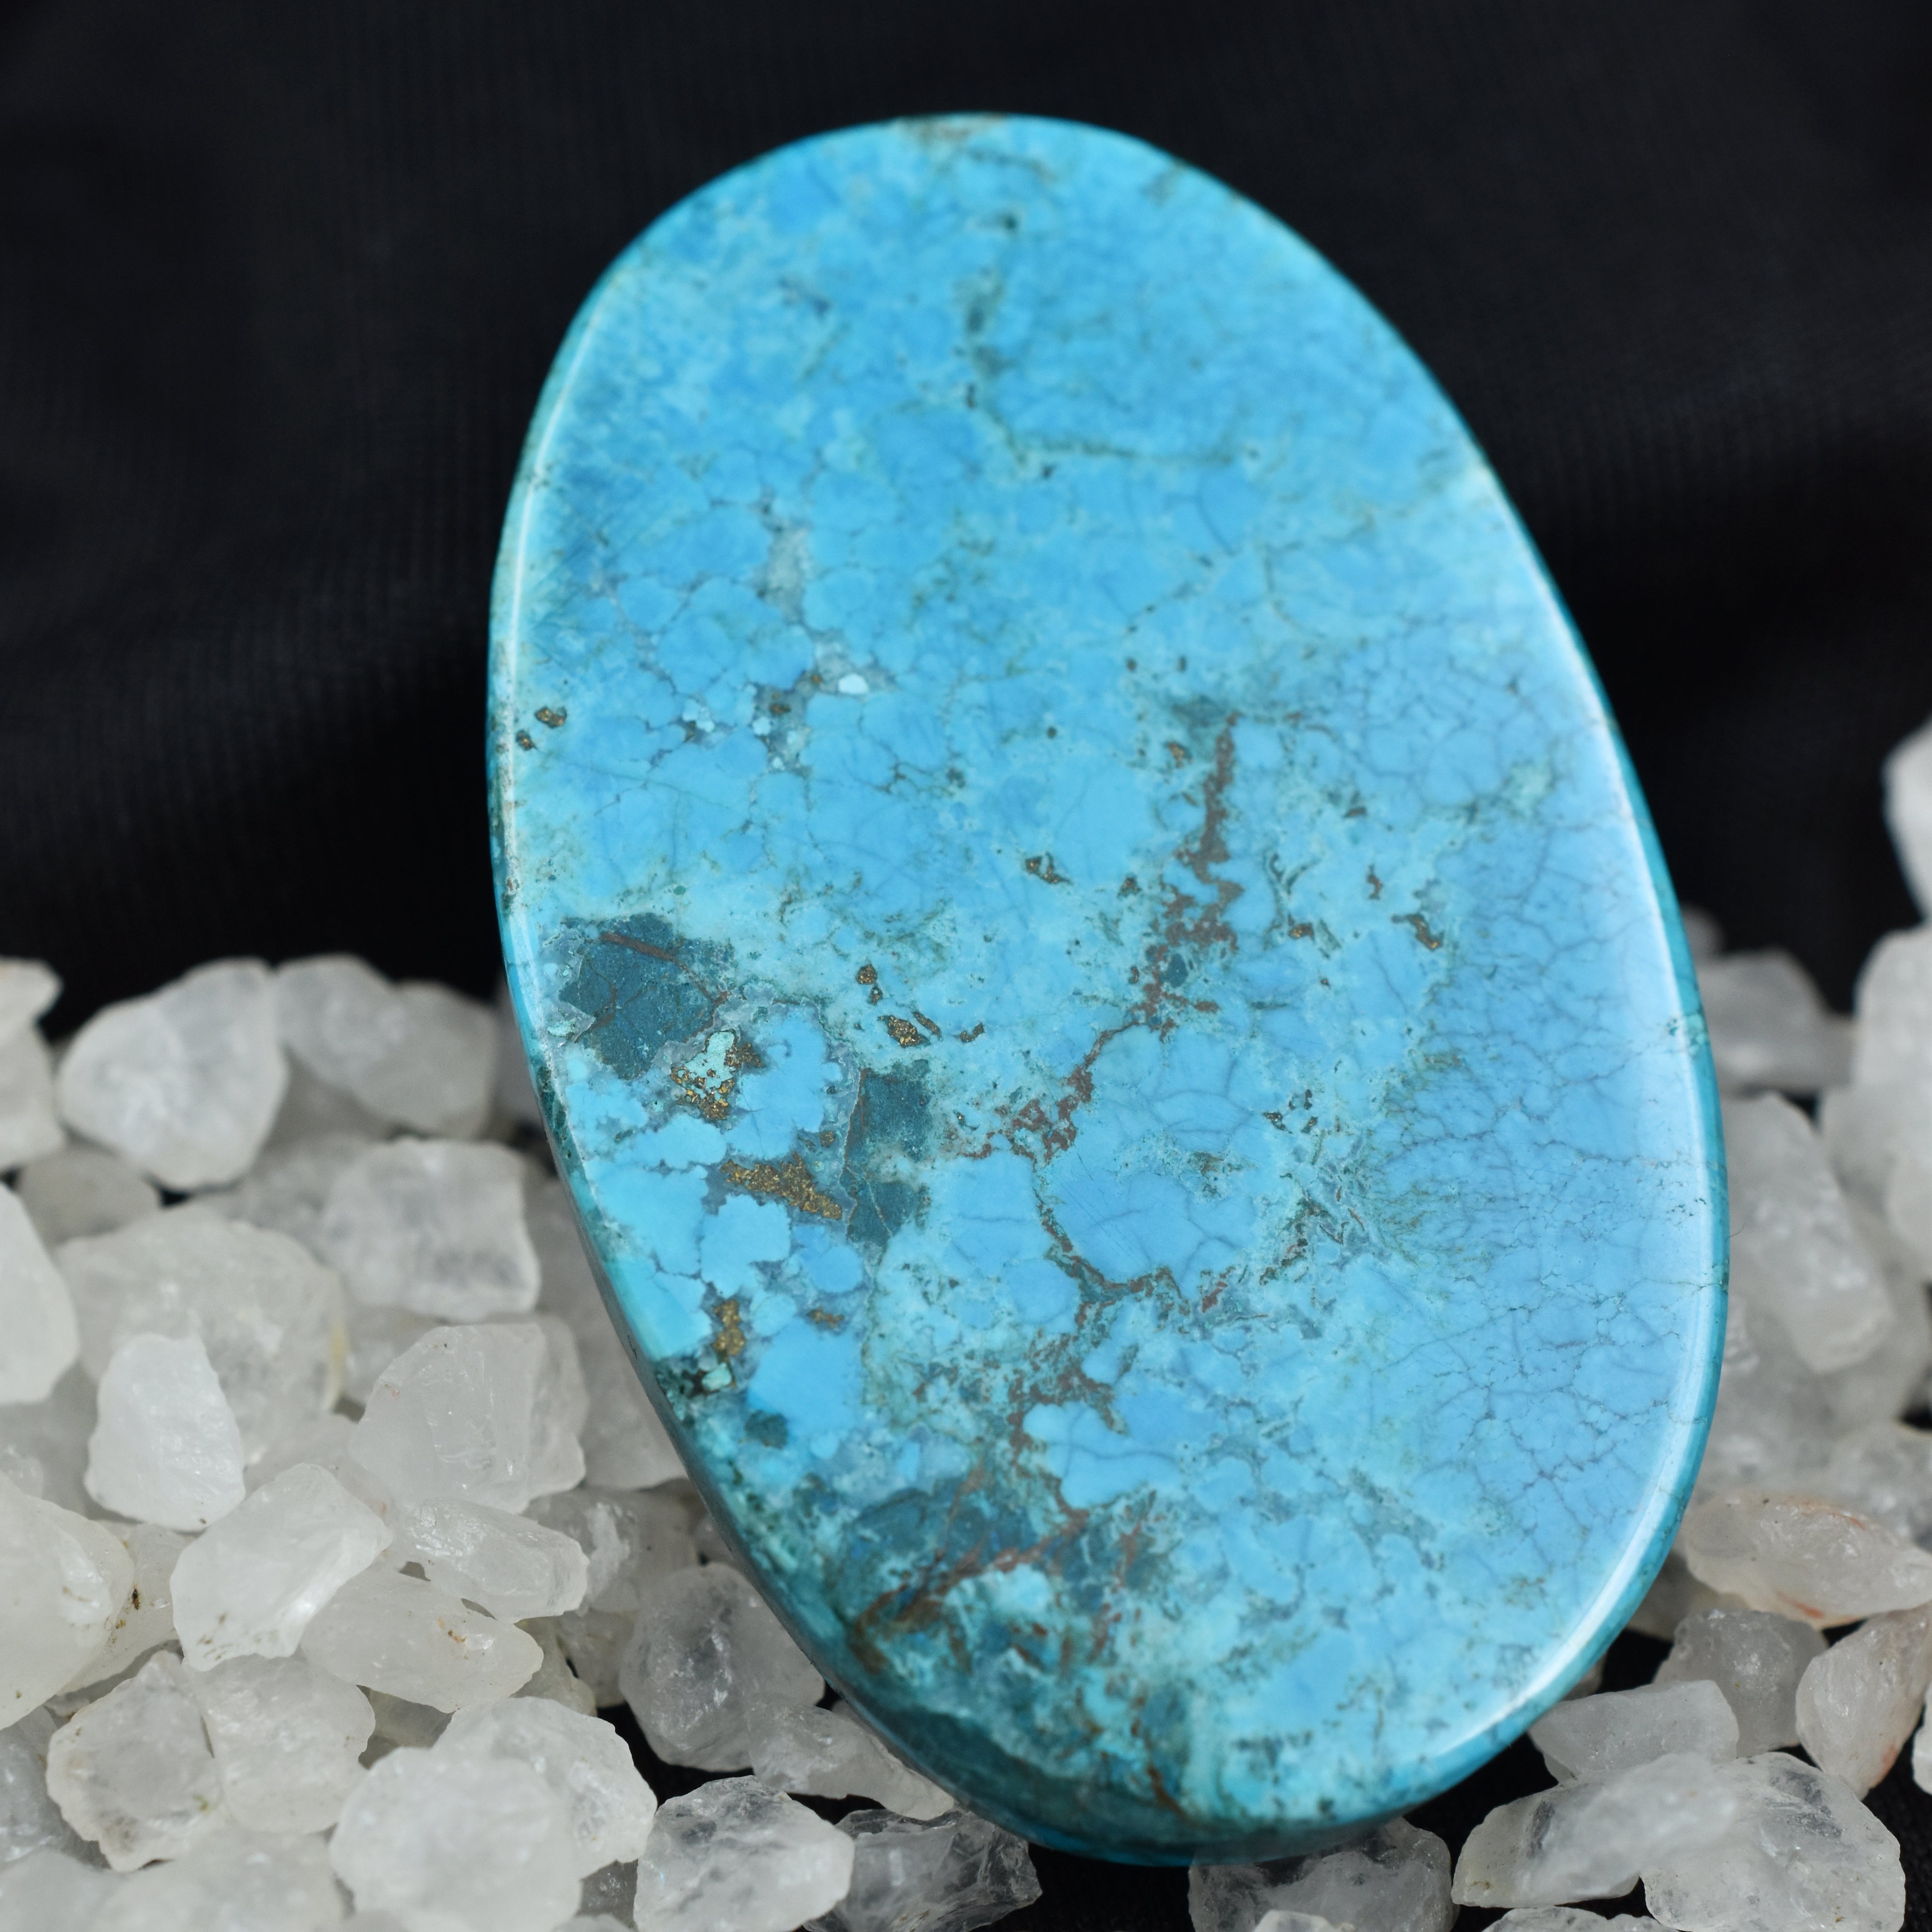 Best Offer On Turquoise !!! Blue Turquoise Slab 45.85 Carat Oval Shape Natural Certified Loose Gemstone | Free Shipping With Extra Special Gift | ON BEST PRICE |